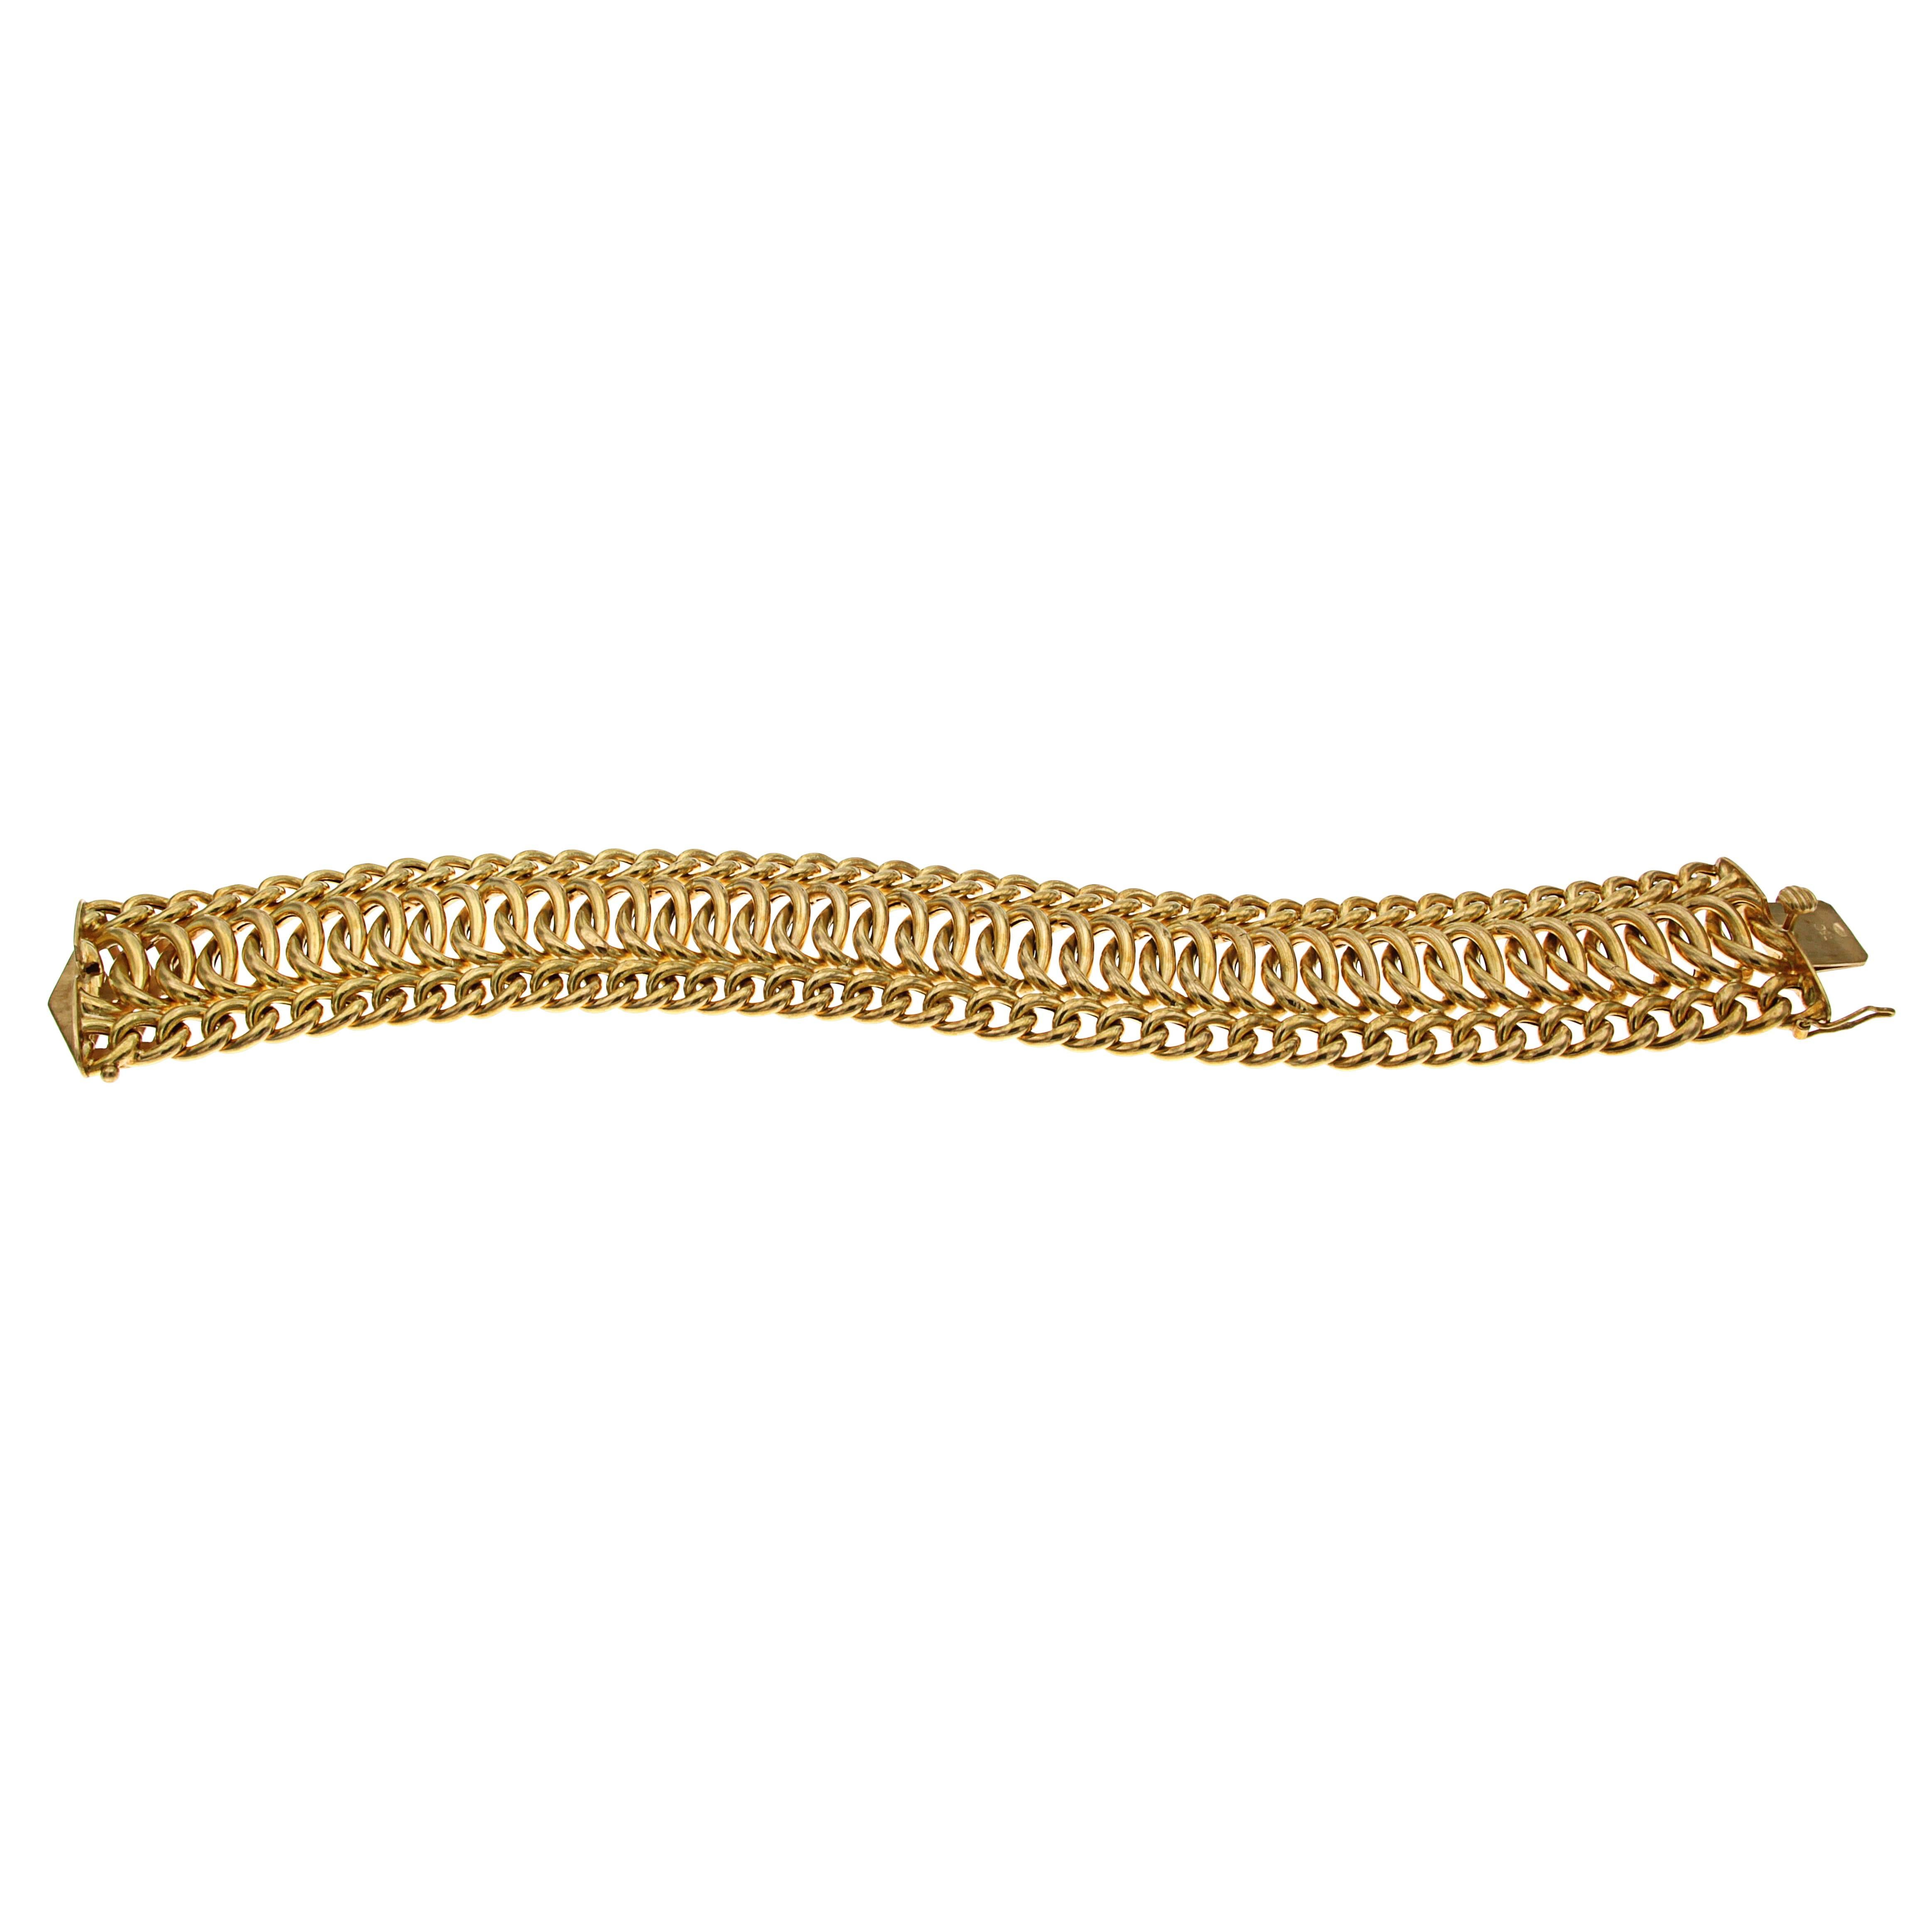 18 carat Rose Gold Link Chain Bracelet of interlocking woven links, bearing 18 carat & 750 Marks, as well as Italian control Marks.